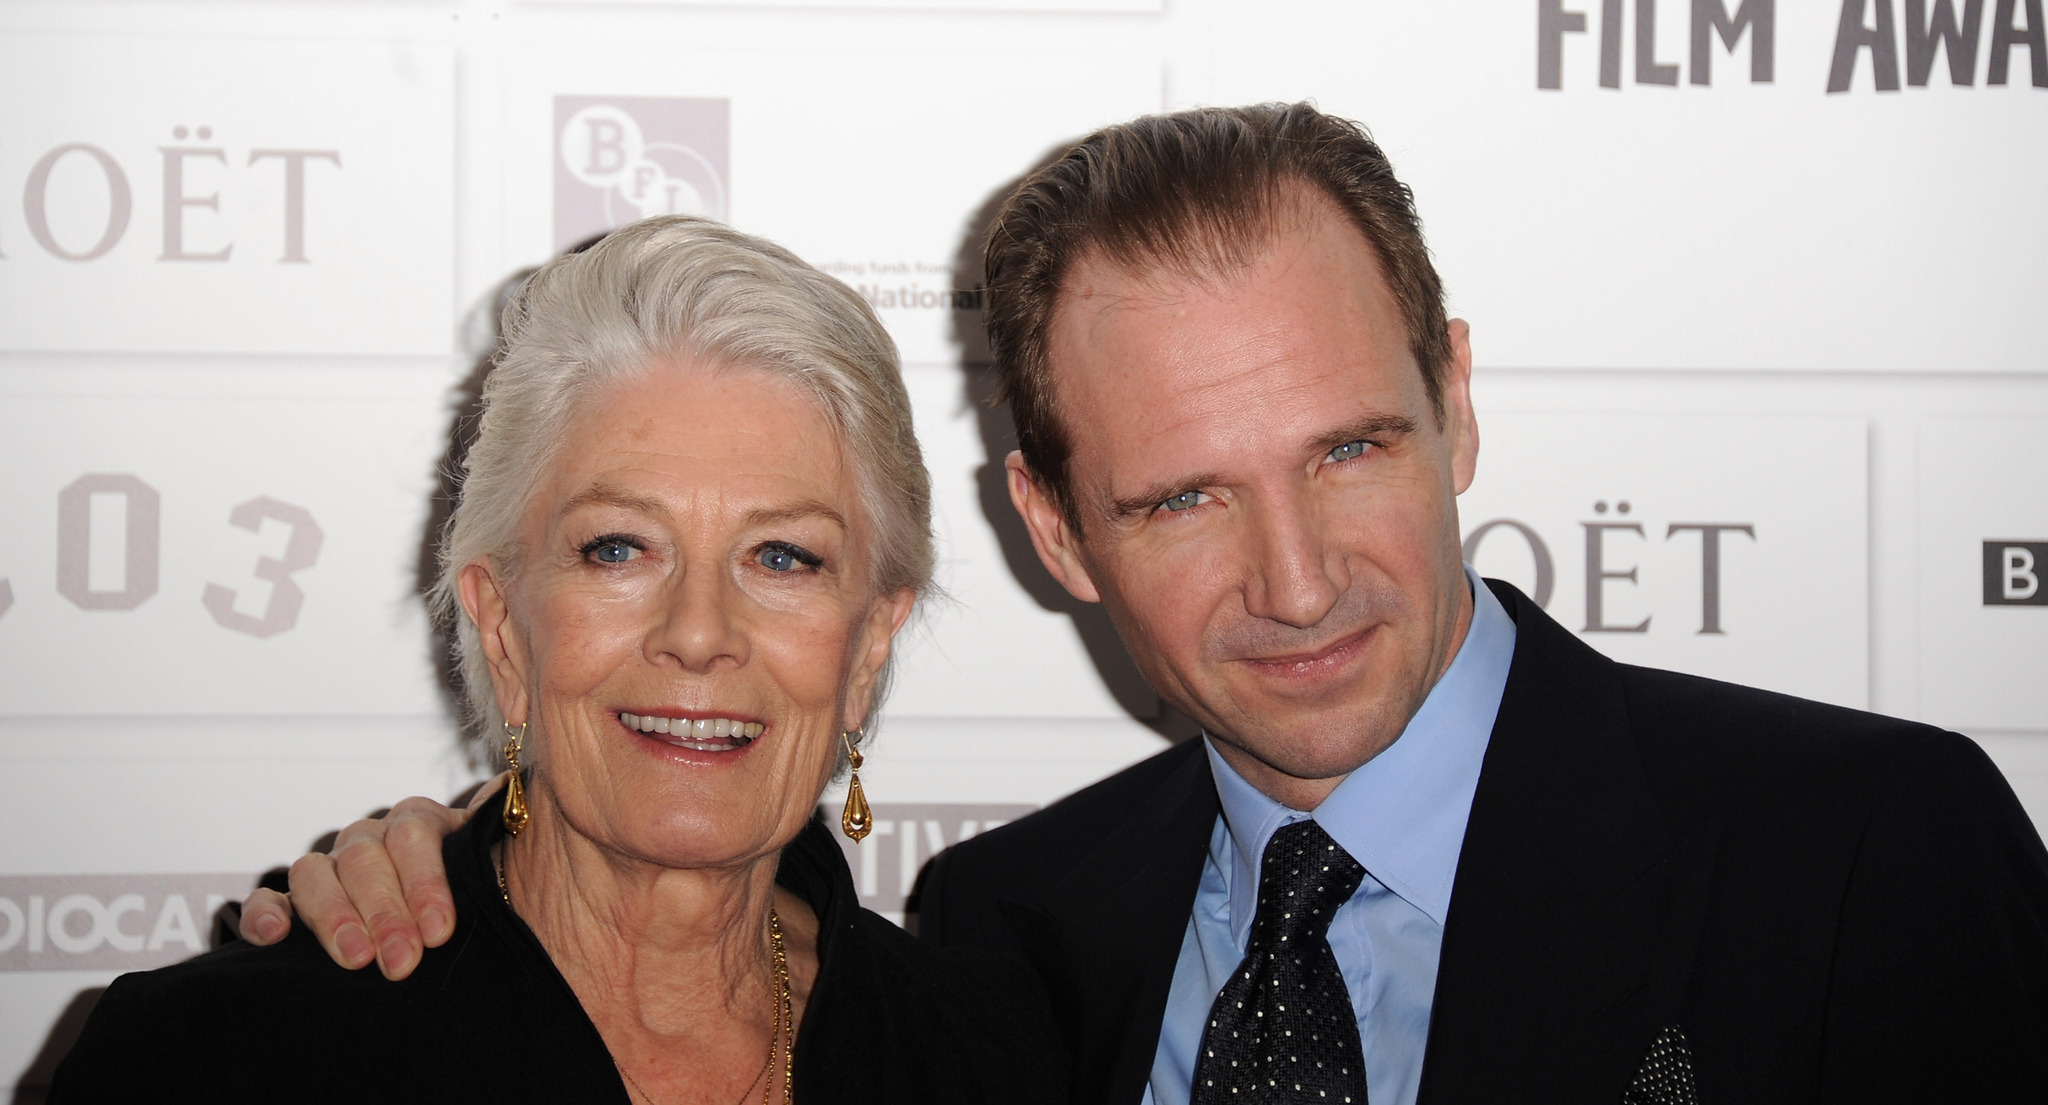 Ralph Fiennes and Vanessa Redgrave